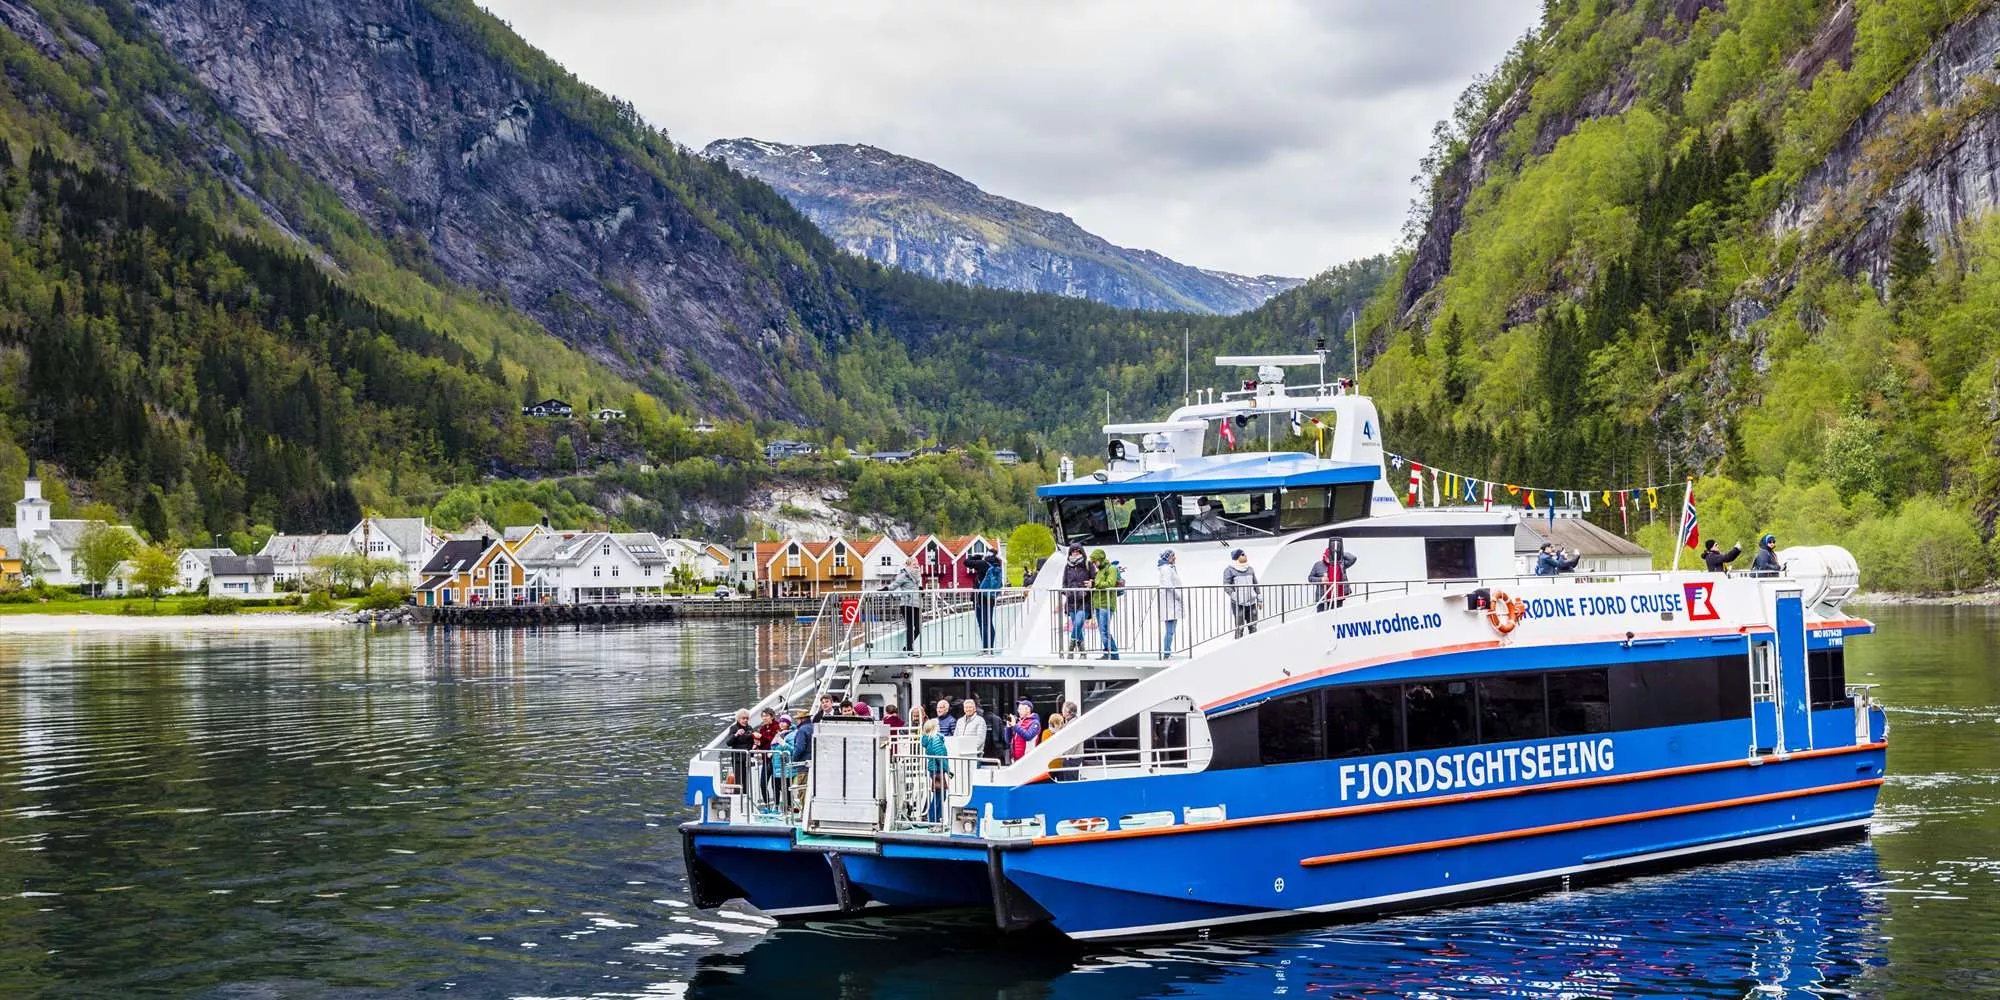 Rodne Fjord Cruise in Norway, Europe | Yachting - Rated 4